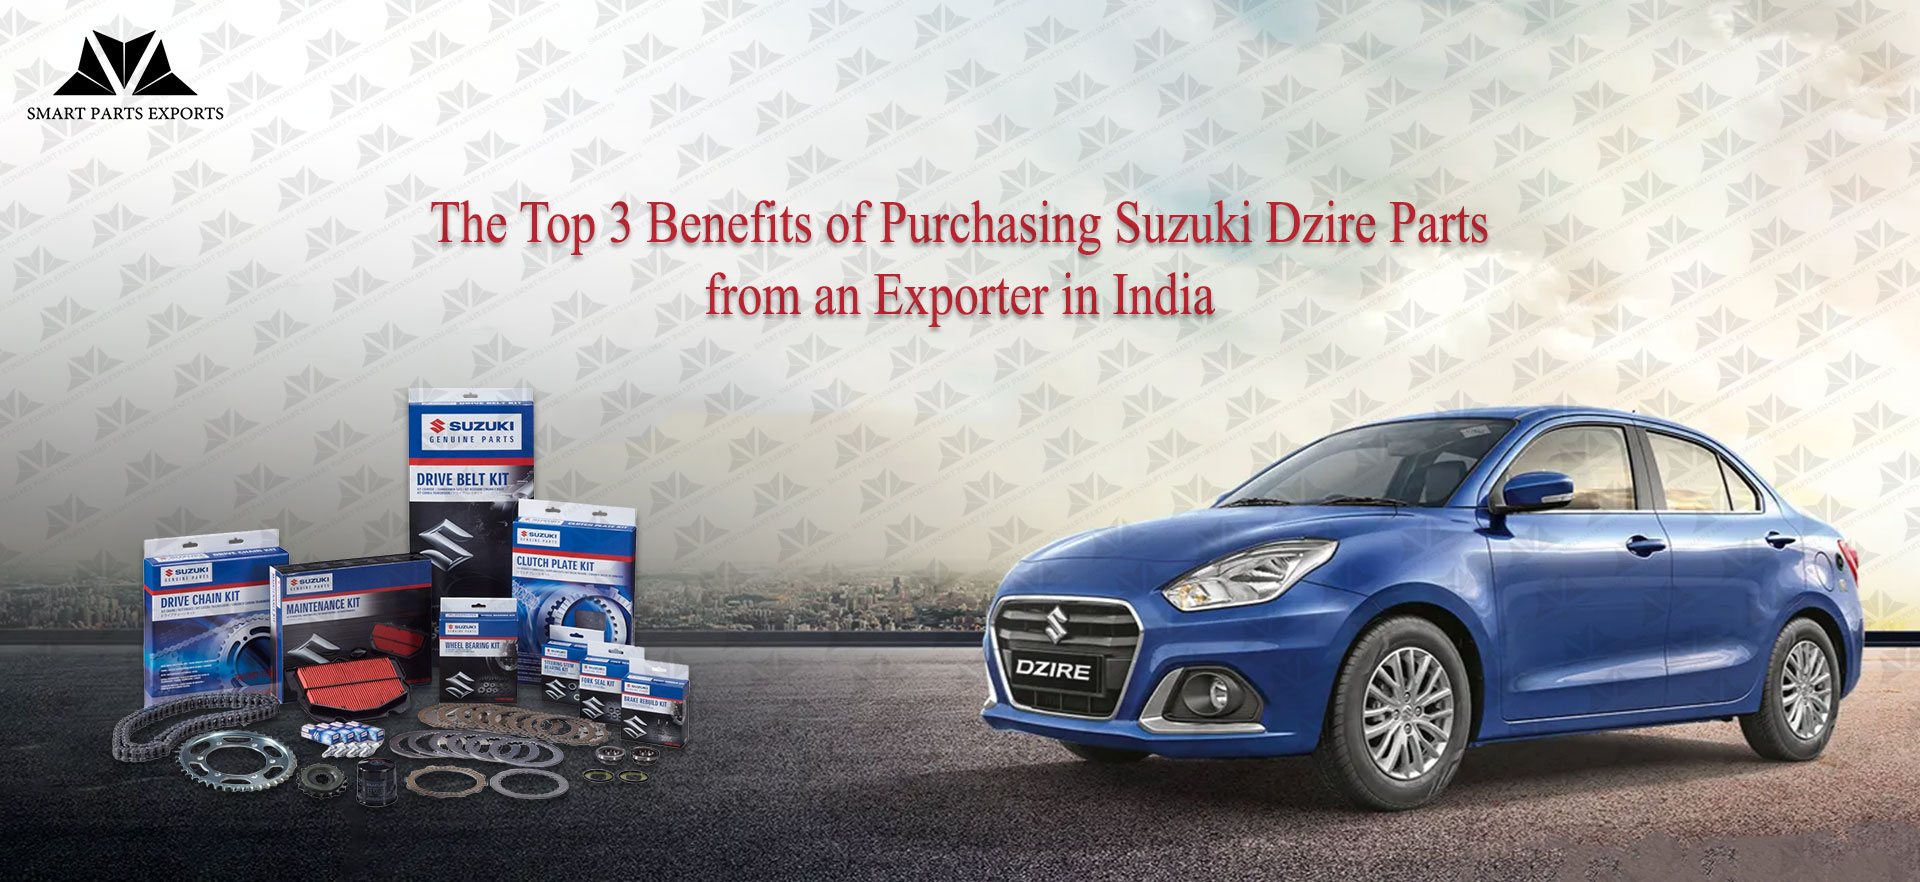 The Top 3 Benefits of Purchasing Suzuki Dzire Parts from an Exporter in India